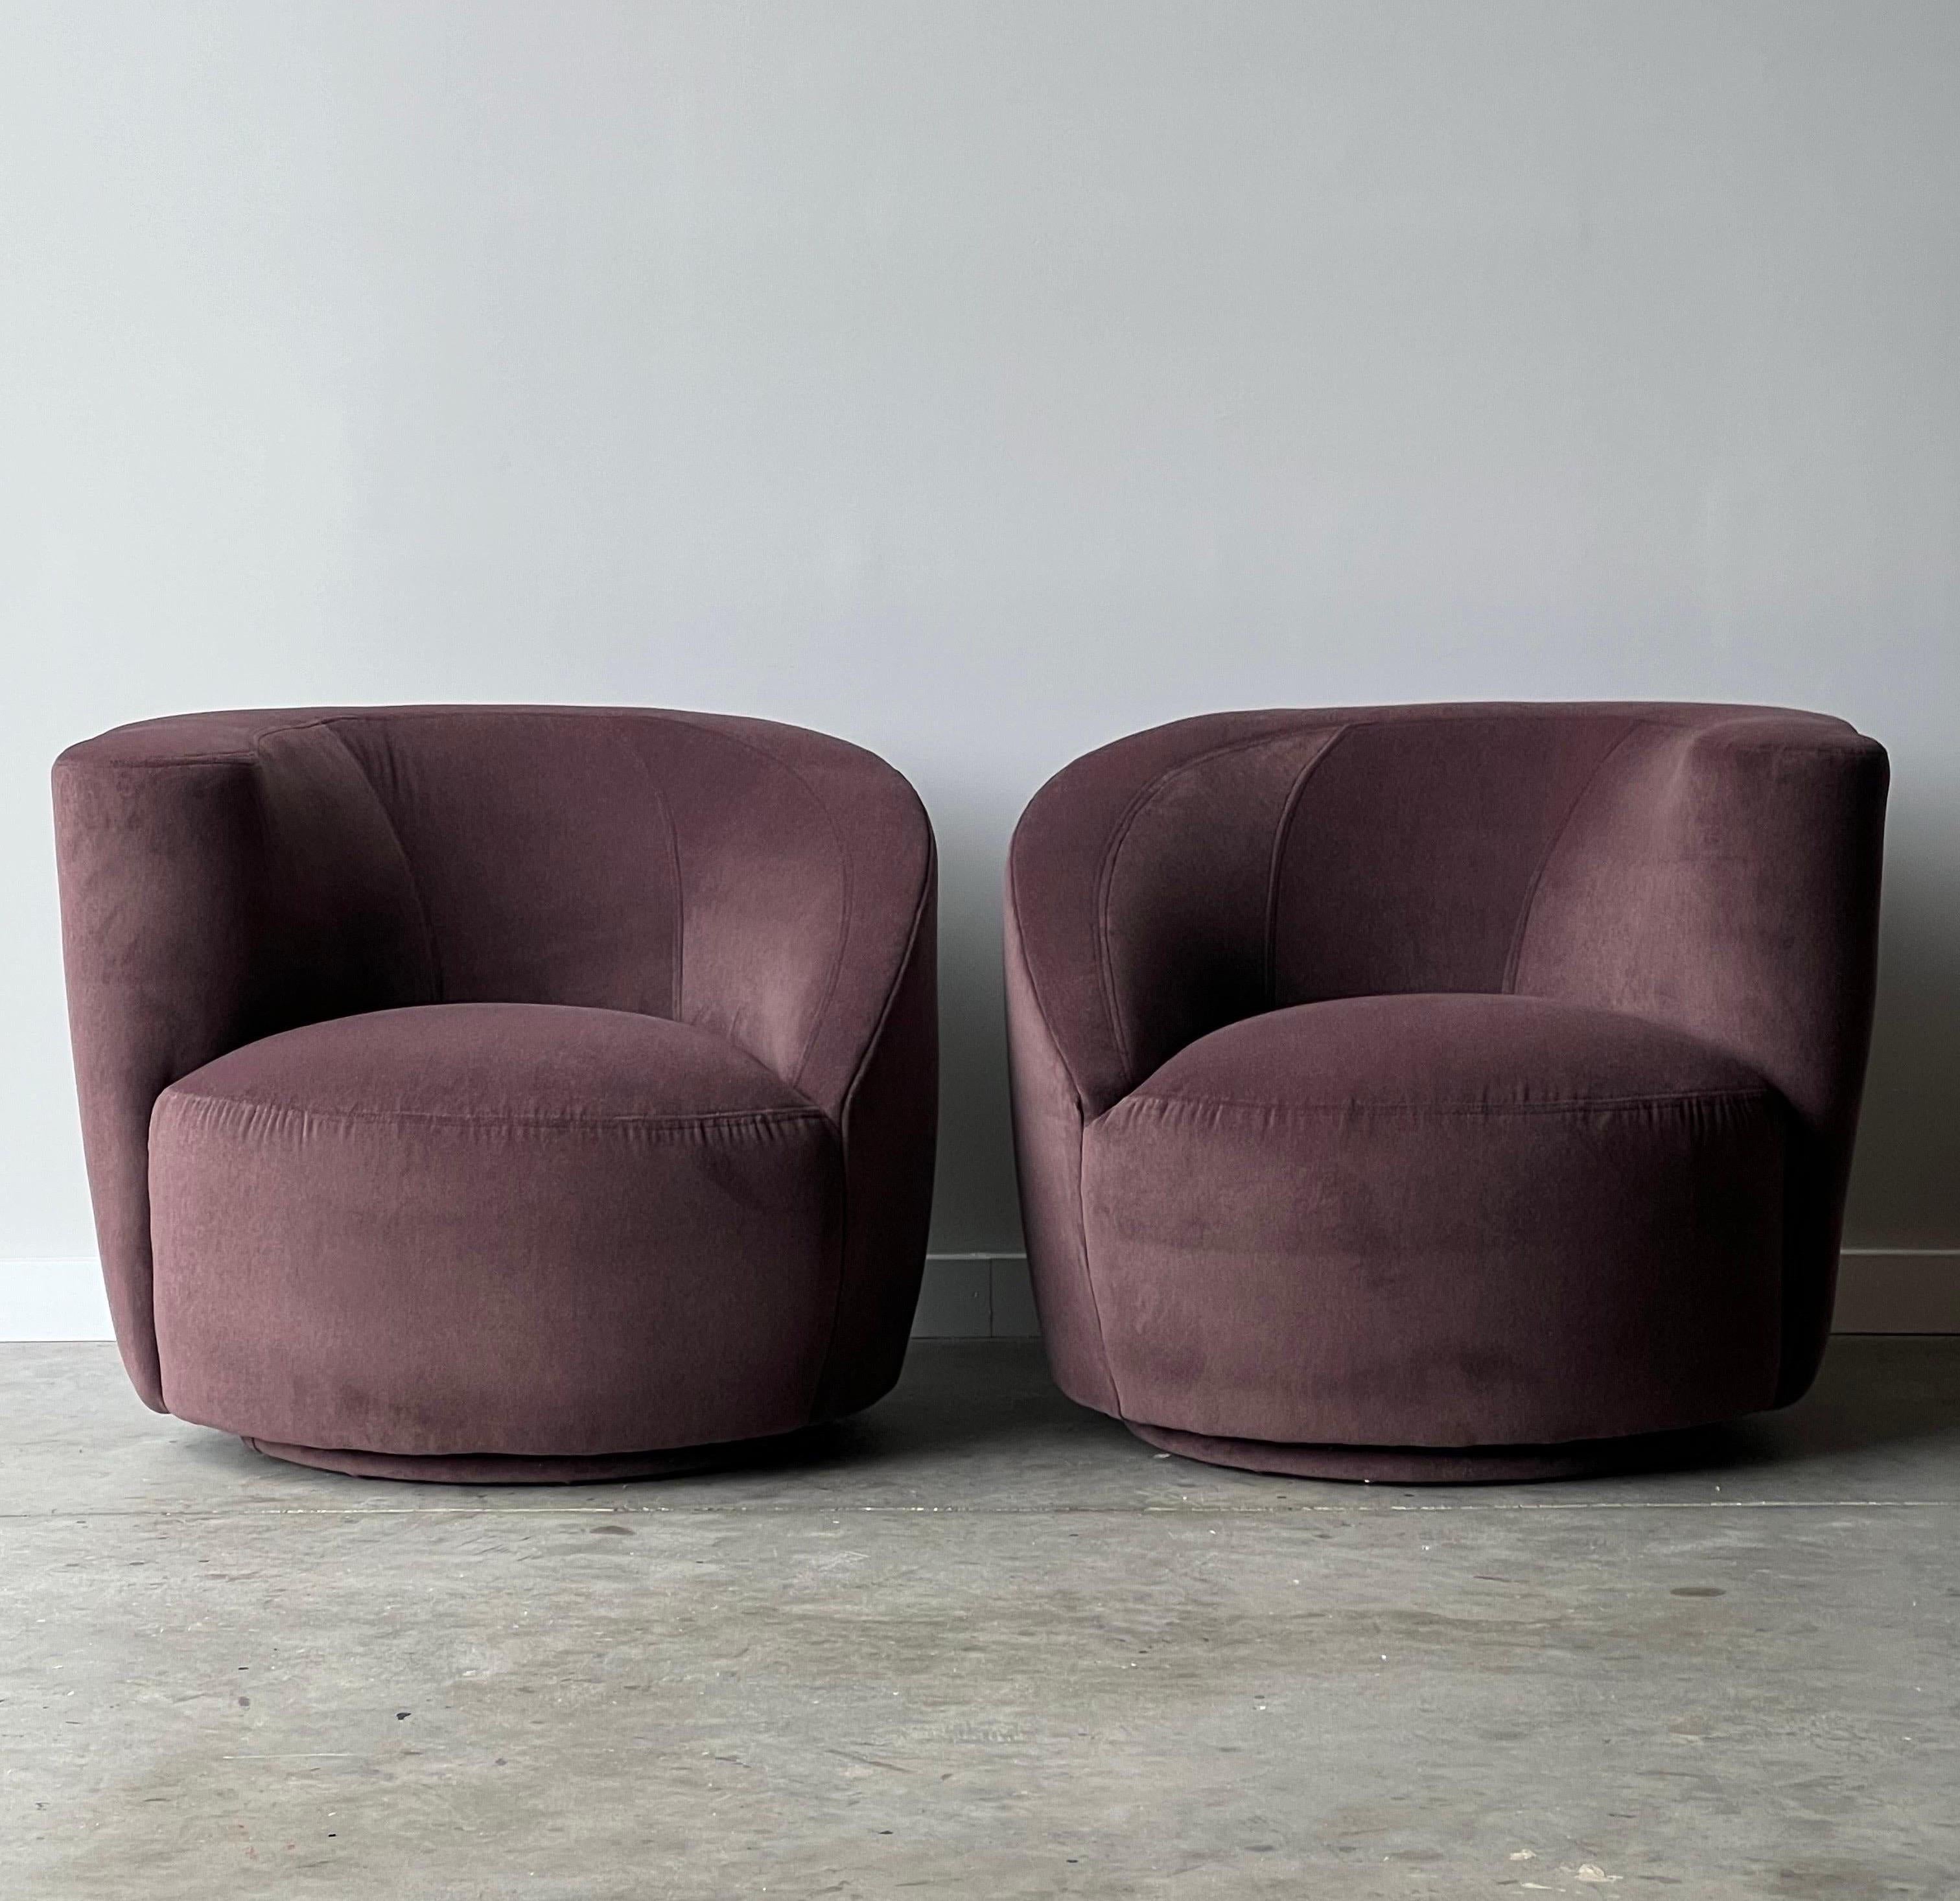 Vintage pair of lounges designed by Vladimir Kagan. This design by Kagan is coined the Nautilus Lounge. The pair sit on swivel bases that rotate with ease. Perfect for a room with panoramic views. They are both sculptural and extremely comfortable.